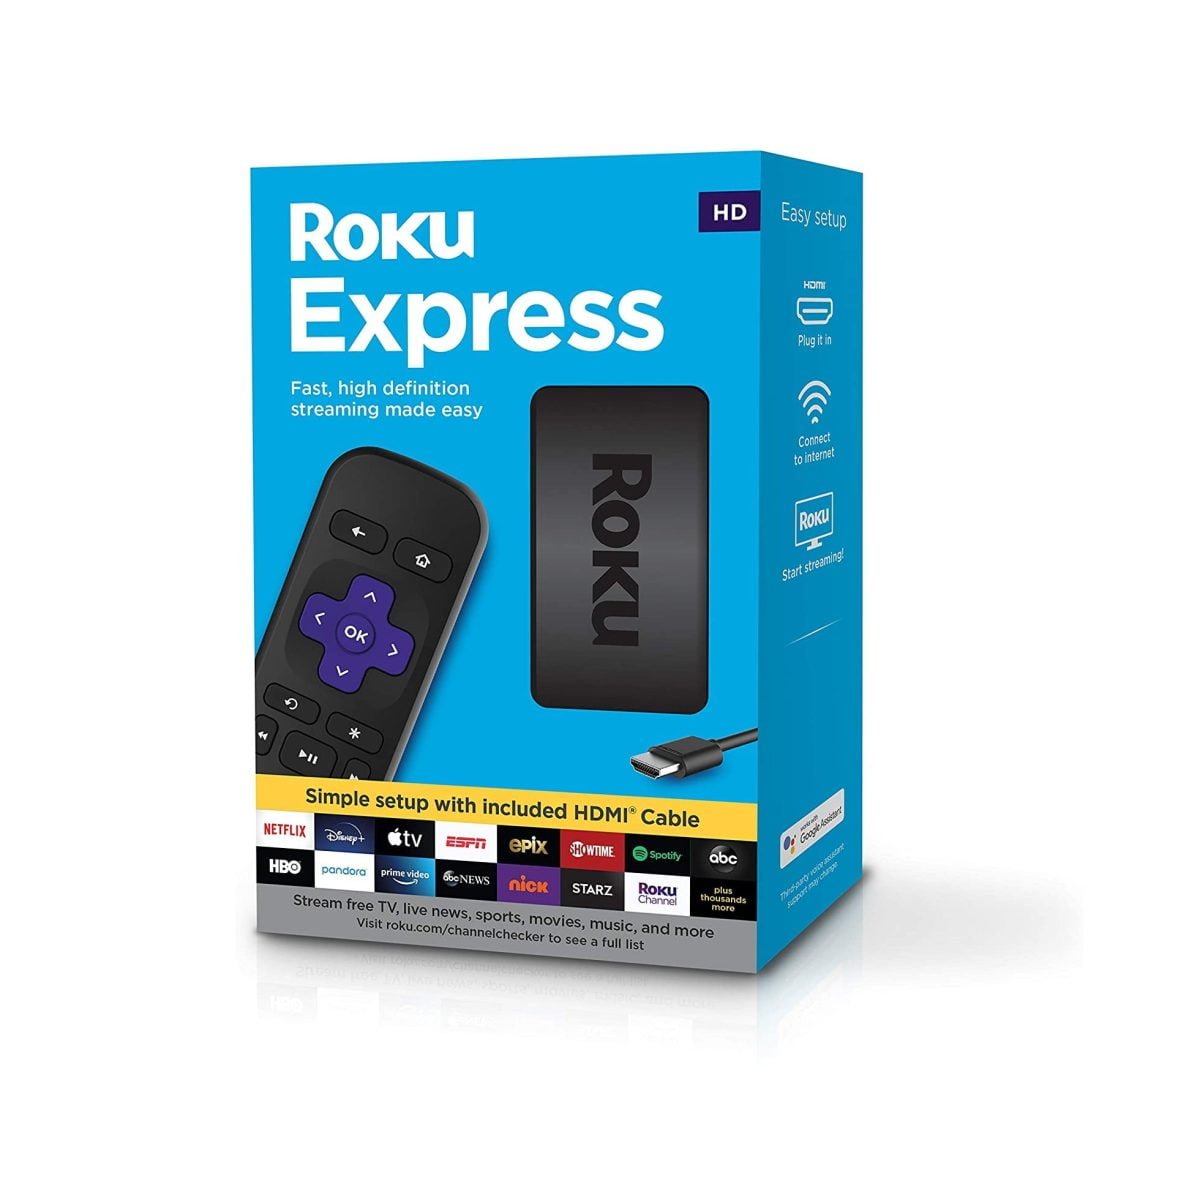 810Dqbdgwl. Ac Sl1500 Roku &Amp;Lt;H1&Amp;Gt;Roku Express | Hd Streaming Media Player With High Speed Hdmi Cable And Simple Remote&Amp;Lt;/H1&Amp;Gt; &Amp;Lt;Ul Class=&Amp;Quot;A-Unordered-List A-Vertical A-Spacing-Mini&Amp;Quot;&Amp;Gt; &Amp;Lt;Li&Amp;Gt;&Amp;Lt;Span Class=&Amp;Quot;A-List-Item&Amp;Quot;&Amp;Gt; Streaming Made Easy: Roku Express Lets You Stream Free, Live And Premium Tv Over The Internet Right To Your Tv; It’s Perfect For New Users, Secondary Tvs And Easy Gifting But Powerful Enough For Seasoned Pros &Amp;Lt;/Span&Amp;Gt;&Amp;Lt;/Li&Amp;Gt; &Amp;Lt;Li&Amp;Gt;&Amp;Lt;Span Class=&Amp;Quot;A-List-Item&Amp;Quot;&Amp;Gt; Quick And Easy Setup: Just Plug It Into Your Tv With The Included High Speed Hdmi Cable And Connect To The Internet To Get Started &Amp;Lt;/Span&Amp;Gt;&Amp;Lt;/Li&Amp;Gt; &Amp;Lt;Li&Amp;Gt;&Amp;Lt;Span Class=&Amp;Quot;A-List-Item&Amp;Quot;&Amp;Gt; Tons Of Power, Tons Of Fun: Compact And Fast, You’ll Stream Your Favorites With Ease; With Movies And Series On Apple Tv+, Prime Video, Netflix, Disney+, Hbo Max, Showtime, And Hulu With Live Tv, Enjoy The Most Talked About Entertainment &Amp;Lt;/Span&Amp;Gt;&Amp;Lt;/Li&Amp;Gt; &Amp;Lt;Li&Amp;Gt;&Amp;Lt;Span Class=&Amp;Quot;A-List-Item&Amp;Quot;&Amp;Gt; Simple Remote: Incredibly Easy To Use, This Remote Features Shortcut Buttons To Popular Streaming Channels &Amp;Lt;/Span&Amp;Gt;&Amp;Lt;/Li&Amp;Gt; &Amp;Lt;Li&Amp;Gt;&Amp;Lt;Span Class=&Amp;Quot;A-List-Item&Amp;Quot;&Amp;Gt; Endless Entertainment: Stream It All, Including Free Tv, Live News, Sports, And More; Never Miss Award-Winning Shows, The Latest Blockbuster Hits, And More; Access 500, 000+ Movies And Tv Episodes; Stream What You Love And Cut Back On Cable Tv Bills &Amp;Lt;/Span&Amp;Gt;&Amp;Lt;/Li&Amp;Gt; &Amp;Lt;Li&Amp;Gt;&Amp;Lt;Span Class=&Amp;Quot;A-List-Item&Amp;Quot;&Amp;Gt; Enjoy Free Tv Channels: Stream Live Tv, 24/7 News, Sports, Movies, Shows, And More On The Roku Channel, Plus A Huge Collection Of Free Entertainment From Top Channels On Featured Free &Amp;Lt;/Span&Amp;Gt;&Amp;Lt;/Li&Amp;Gt; &Amp;Lt;/Ul&Amp;Gt; &Amp;Lt;Div Class=&Amp;Quot;A-Row A-Expander-Container A-Expander-Inline-Container&Amp;Quot;&Amp;Gt; &Amp;Lt;Div Class=&Amp;Quot;A-Expander-Content A-Expander-Extend-Content A-Expander-Content-Expanded&Amp;Quot;&Amp;Gt; &Amp;Lt;Ul Class=&Amp;Quot;A-Unordered-List A-Vertical A-Spacing-None&Amp;Quot;&Amp;Gt; &Amp;Lt;Li&Amp;Gt;&Amp;Lt;Span Class=&Amp;Quot;A-List-Item&Amp;Quot;&Amp;Gt;The Free Roku Mobile App: Turn Your Ios Or Android Device Into The Ultimate Streaming Companion; Control Your Roku Express Media Player Or Roku Tv, Use Voice Search, Enjoy Private Listening, And More On Ios And Android&Amp;Lt;/Span&Amp;Gt;&Amp;Lt;/Li&Amp;Gt; &Amp;Lt;Li&Amp;Gt;&Amp;Lt;Span Class=&Amp;Quot;A-List-Item&Amp;Quot;&Amp;Gt;Automatic Software Updates: Get The Most Up To Date Software Including All The Latest Features And Available Channels Without Even Thinking About It&Amp;Lt;/Span&Amp;Gt;&Amp;Lt;/Li&Amp;Gt; &Amp;Lt;Li&Amp;Gt;&Amp;Lt;Span Class=&Amp;Quot;A-List-Item&Amp;Quot;&Amp;Gt;Works With Popular Voice Assistants: Enjoy Easy Voice Control With Siri, Alexa, Or Hey Google&Amp;Lt;/Span&Amp;Gt;&Amp;Lt;/Li&Amp;Gt; &Amp;Lt;/Ul&Amp;Gt; &Amp;Lt;/Div&Amp;Gt; &Amp;Lt;/Div&Amp;Gt; Roku Express Roku Express | Hd Streaming Media Player With High Speed Hdmi Cable And Simple Remote